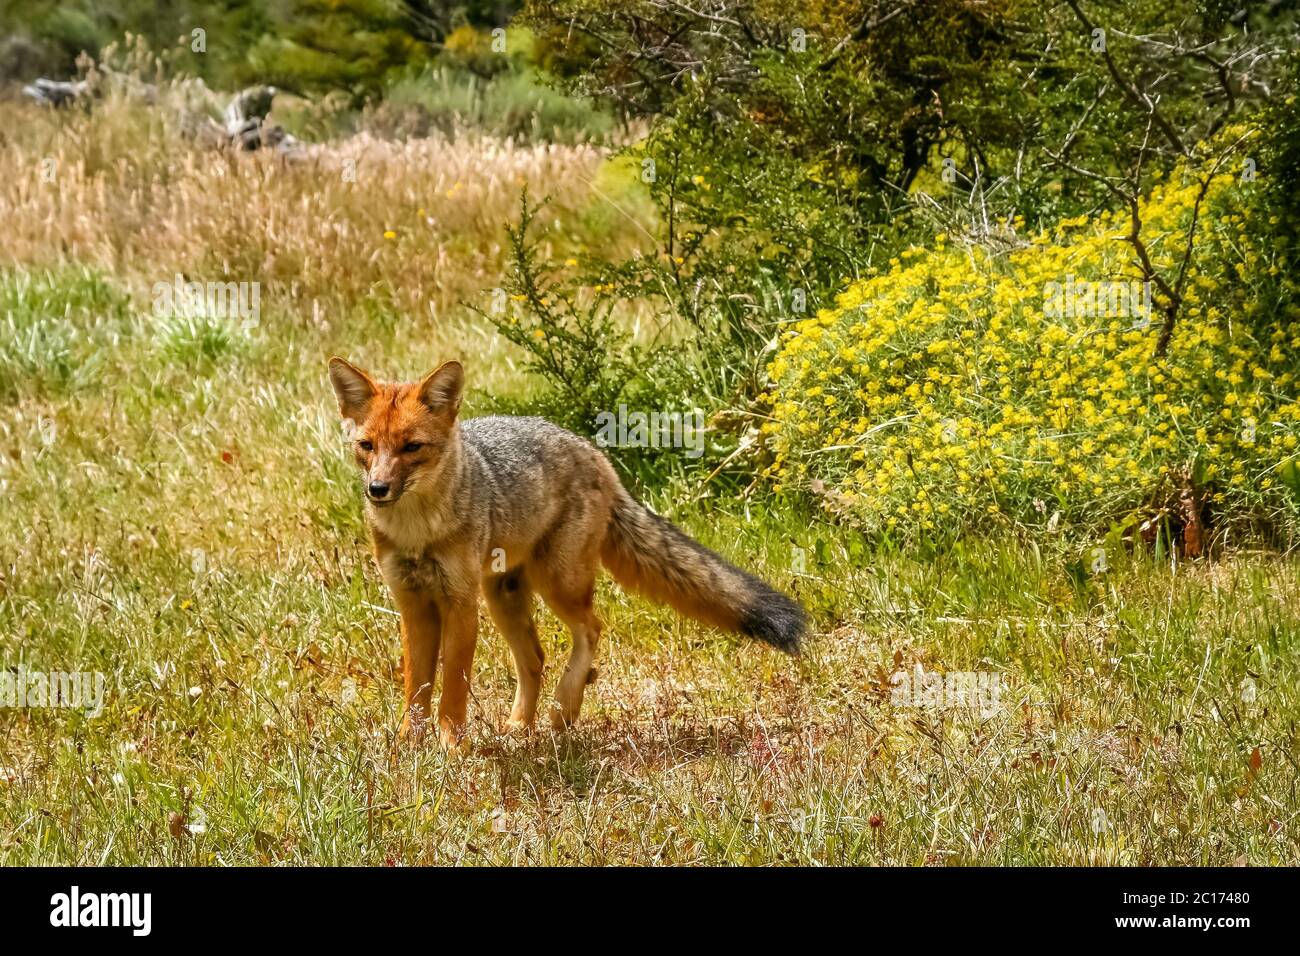 Patagonian fox in the grass Stock Photo